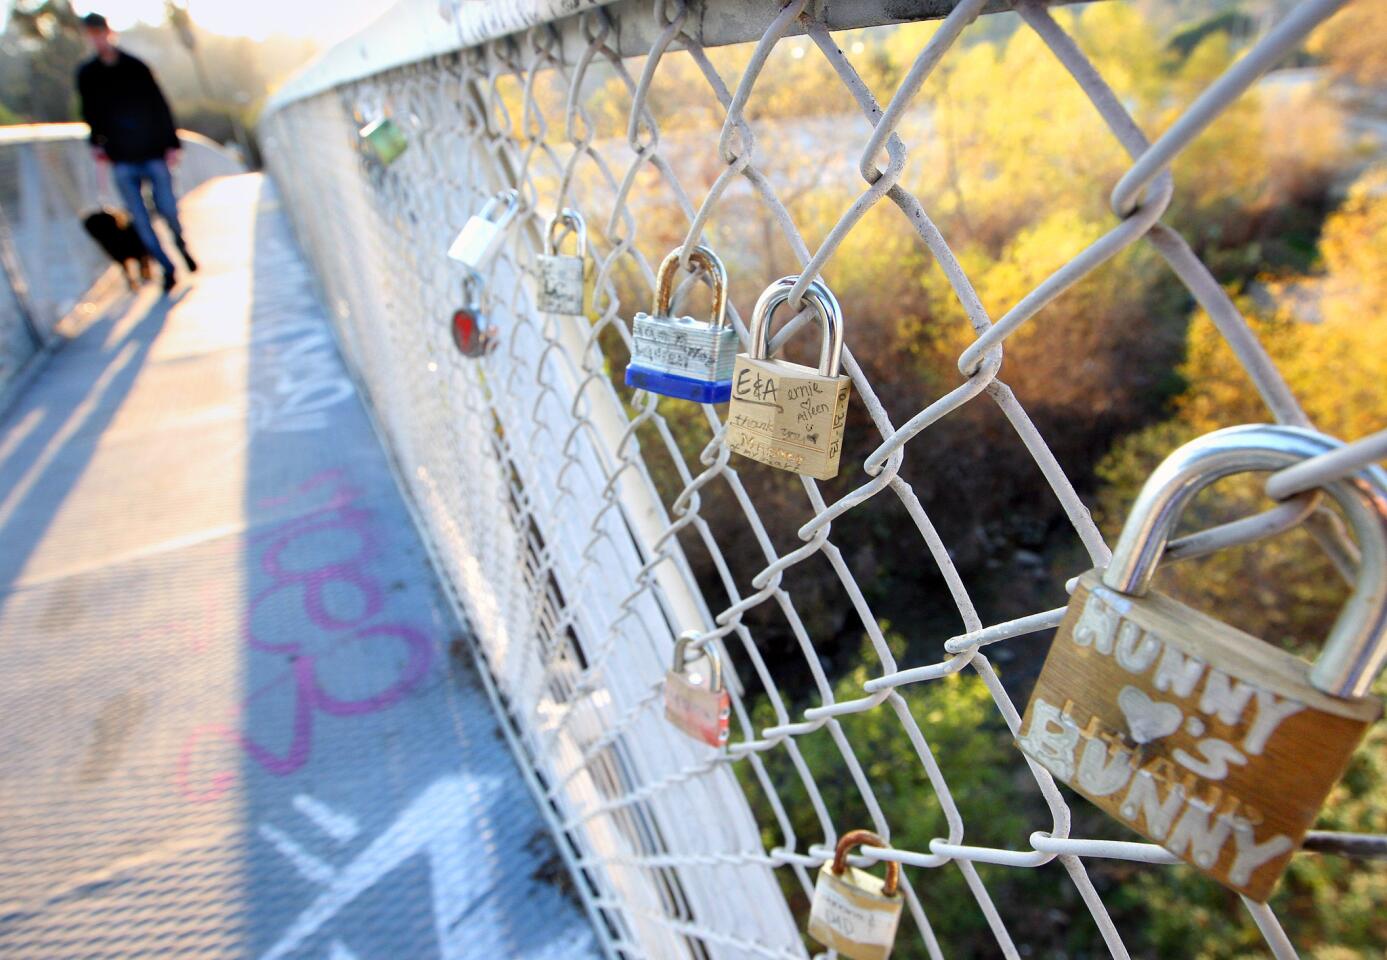 A pedestrian and his dog walk by love locks attached to the Sunnynook Pedestrian bridge in Atwater that follow a world wide romantic tradition.